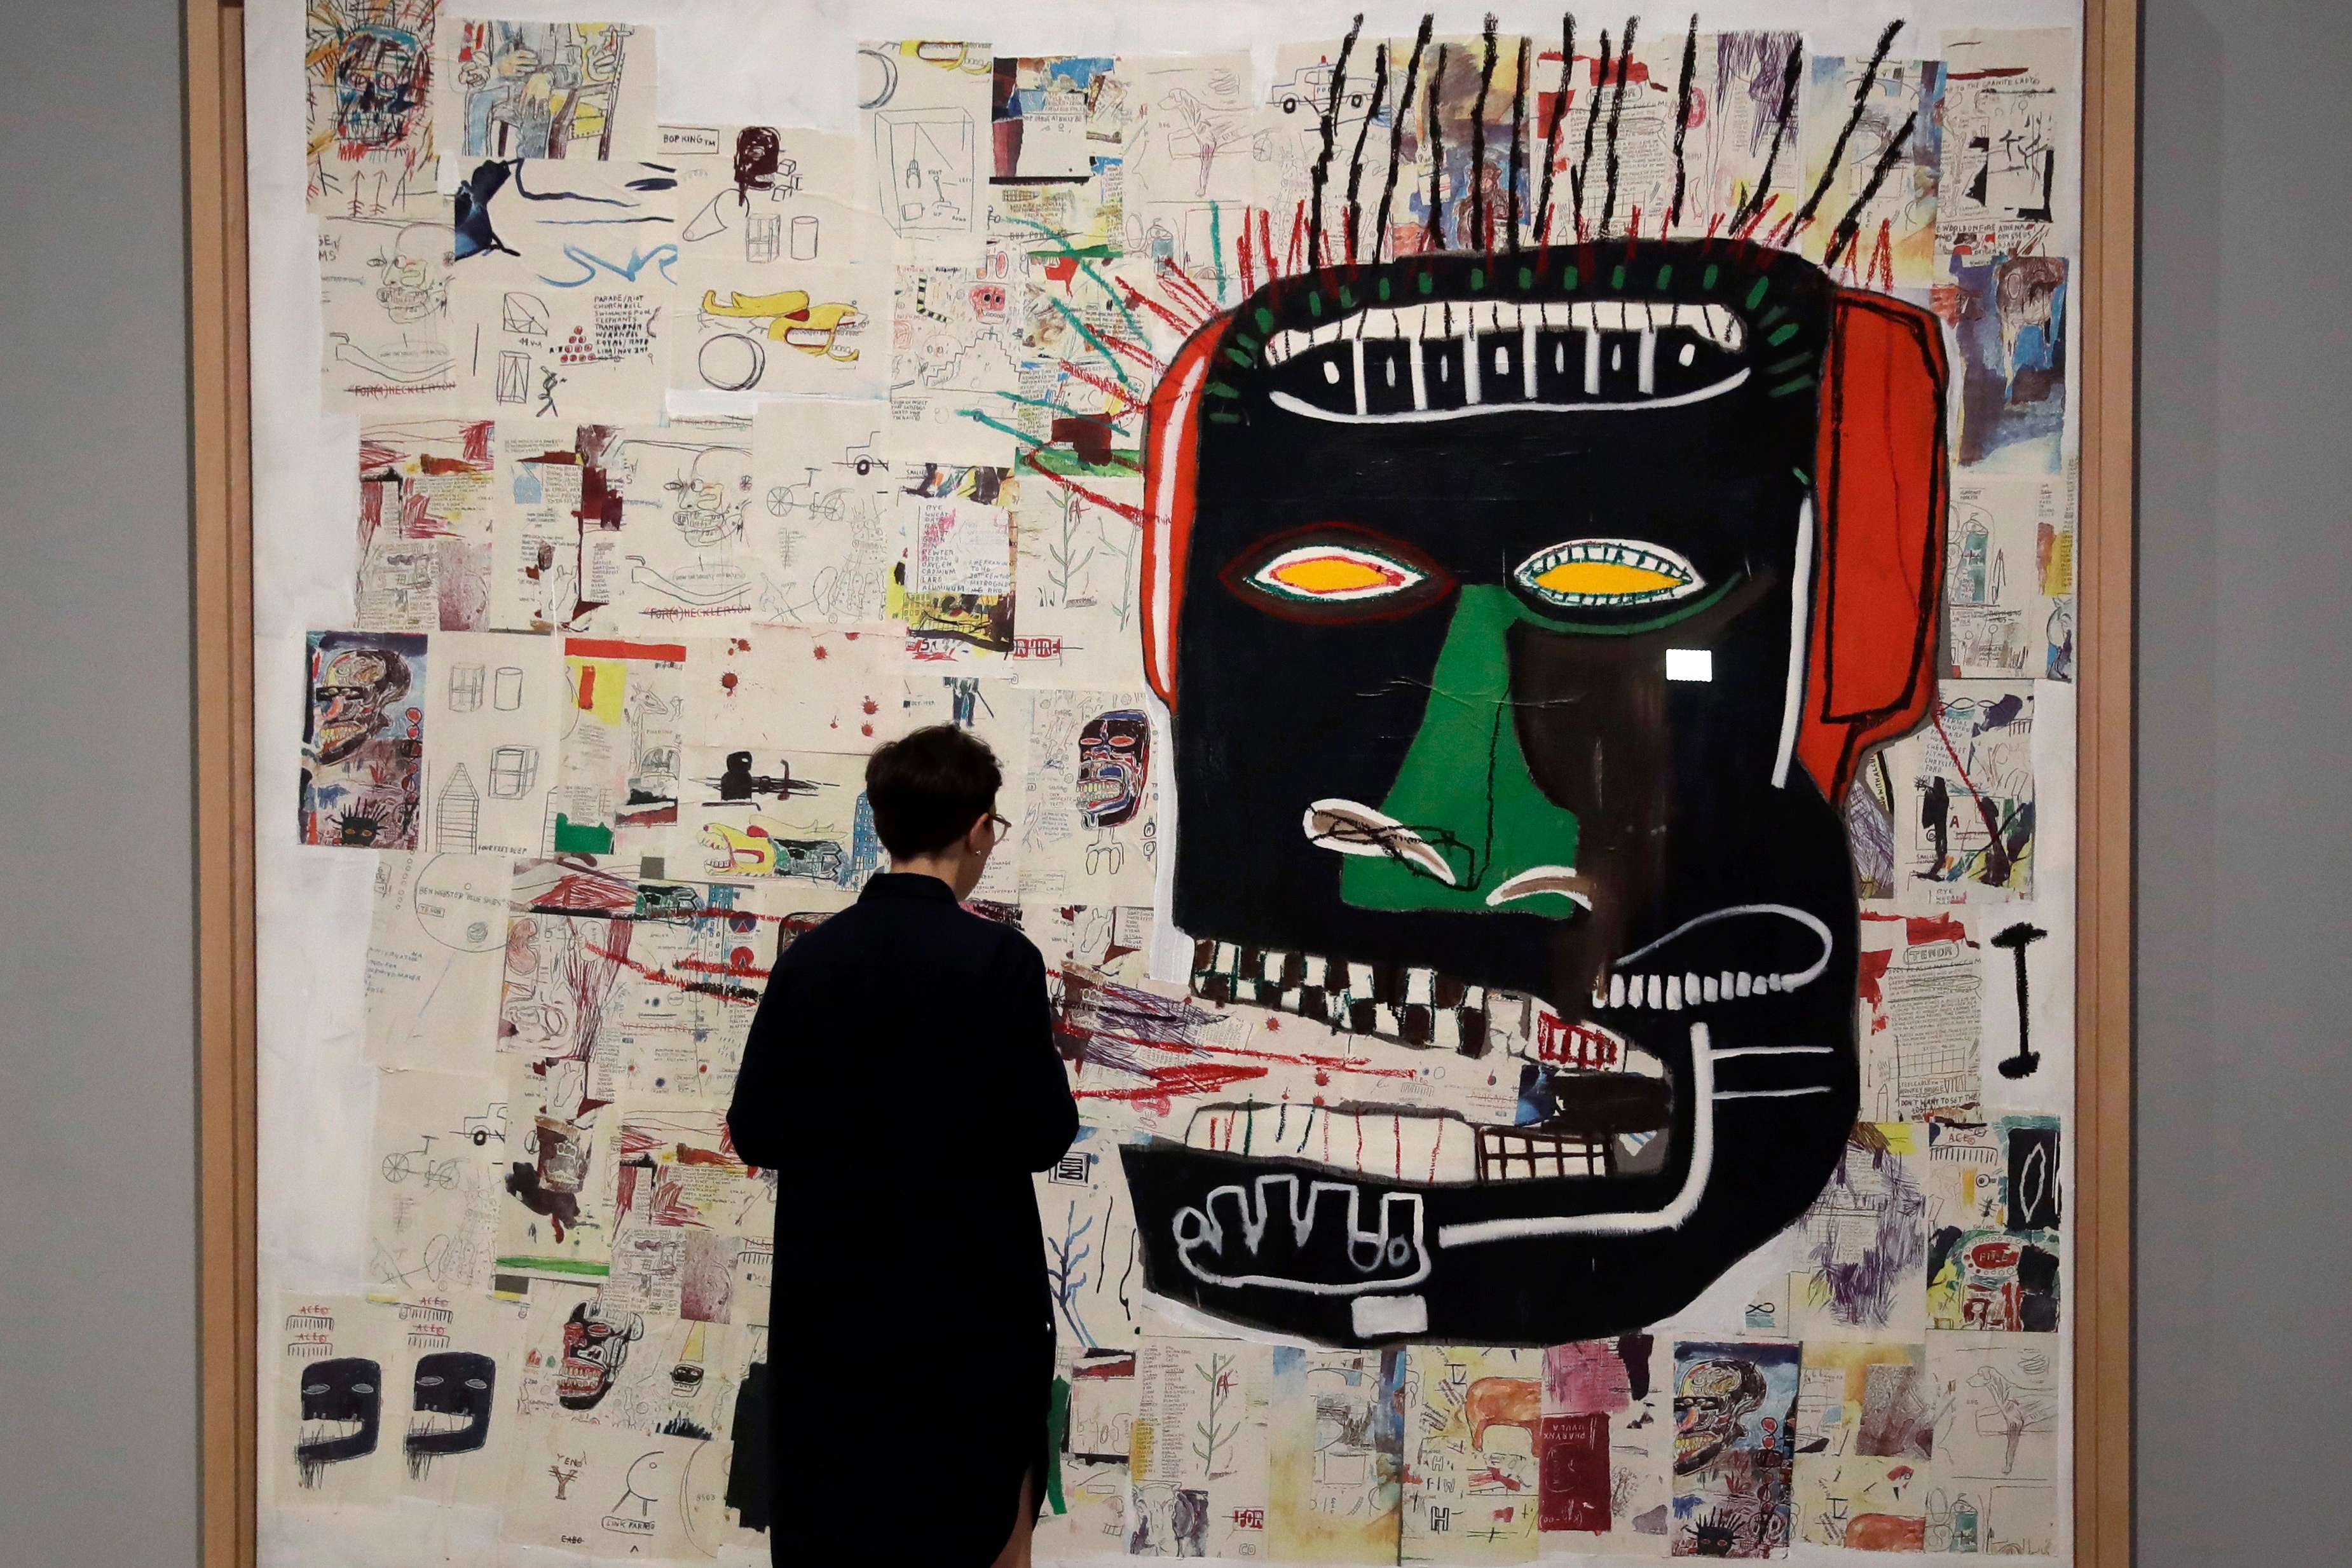 Jean-Michel Basquiat's 6 Most Interesting Paintings at Fondation